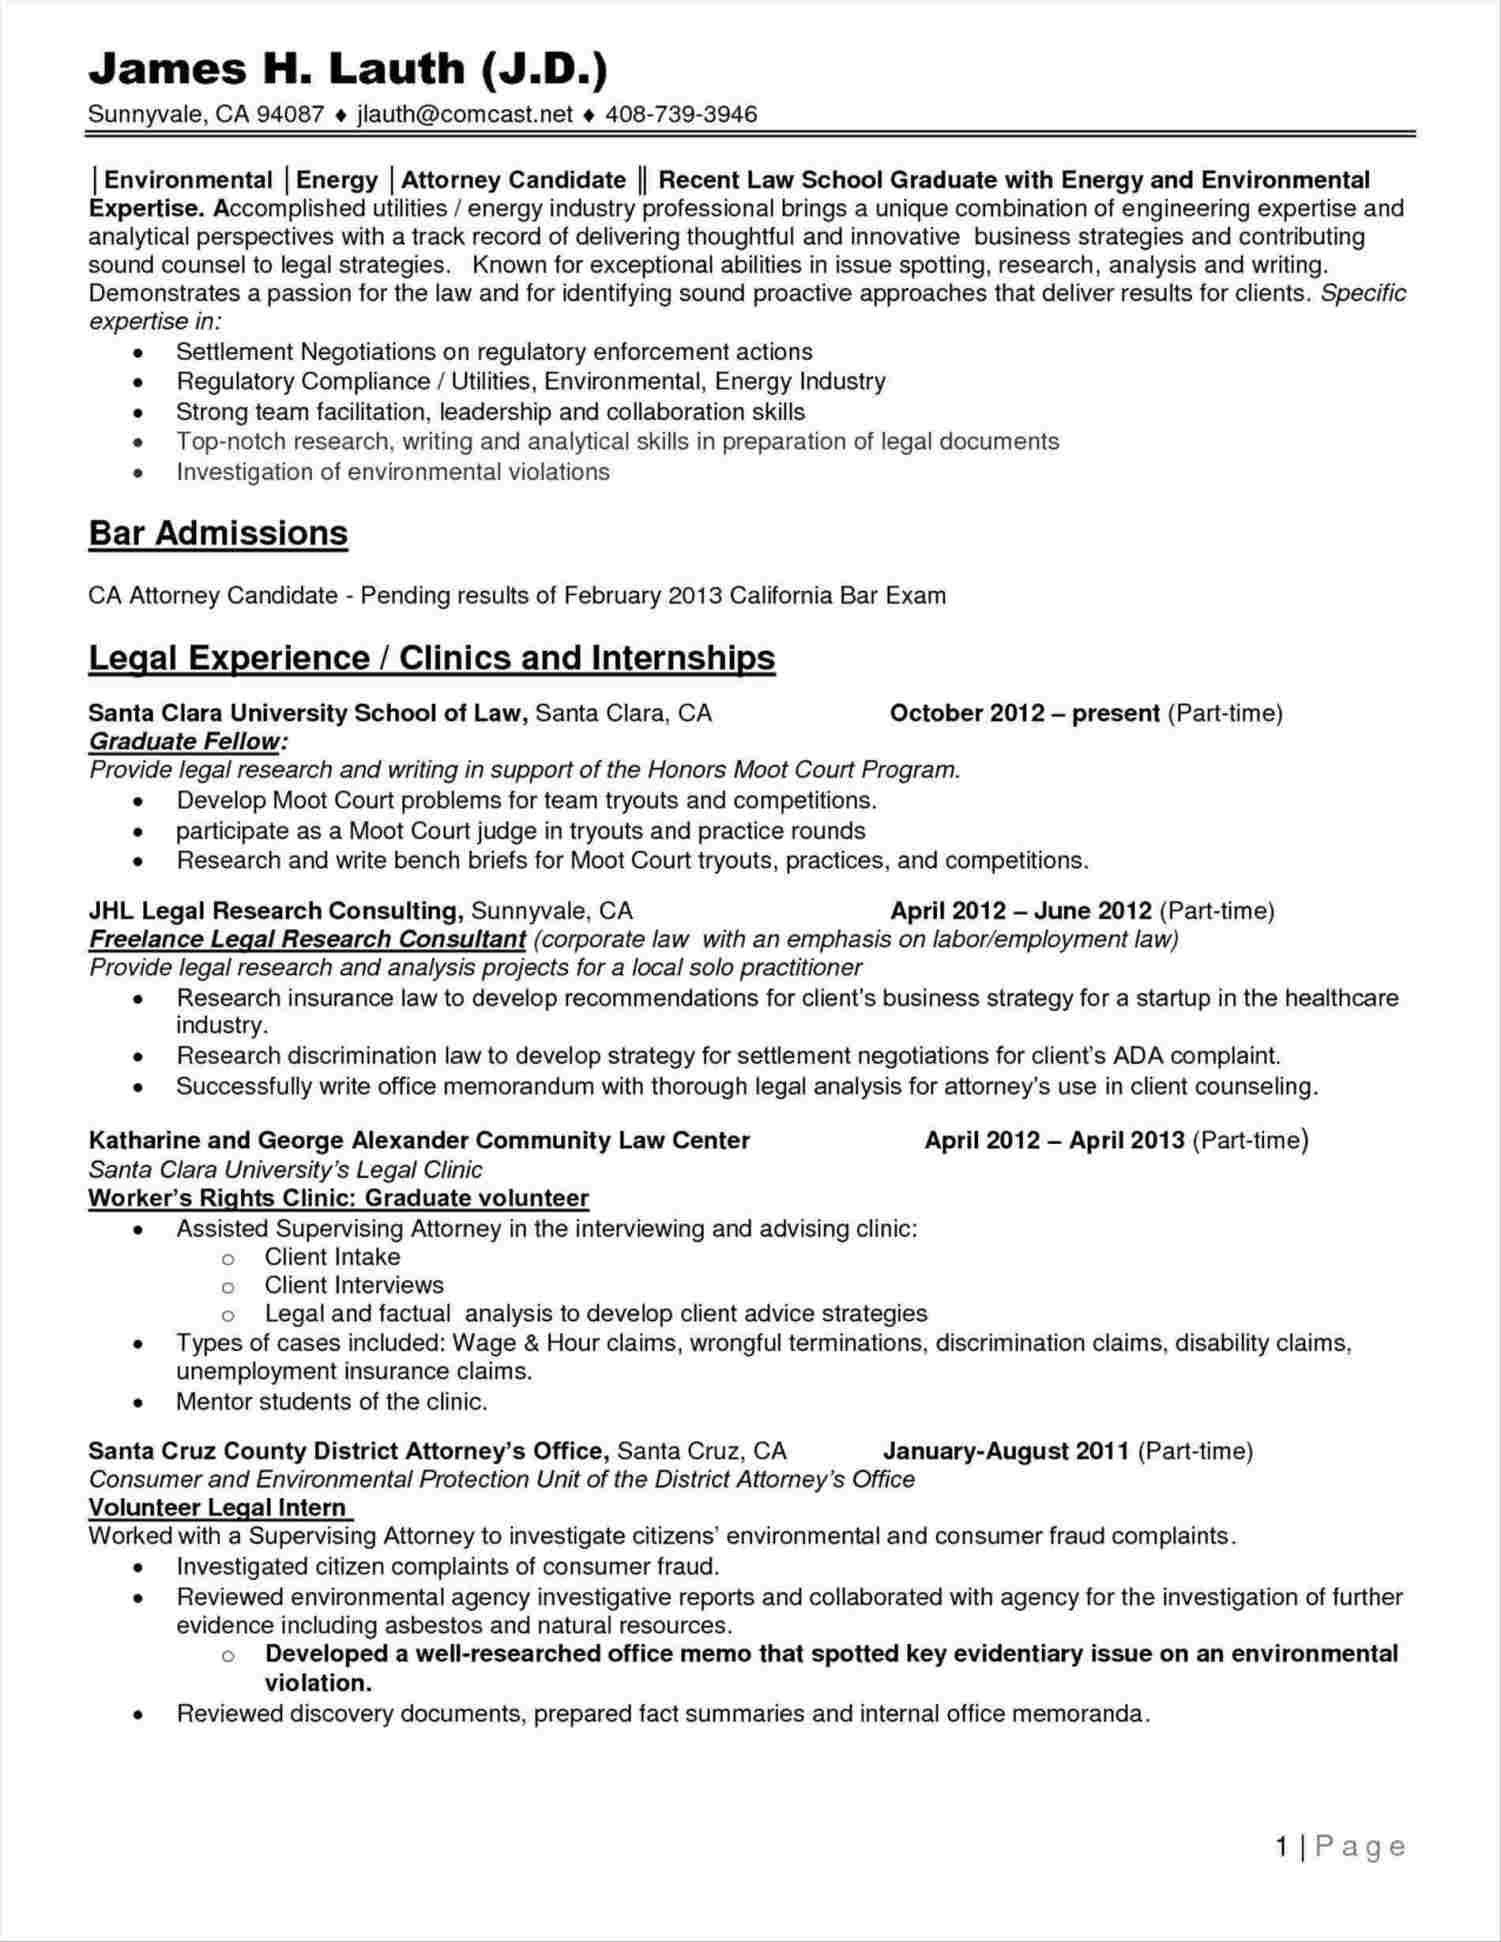 Yale Resume Examples Student Resume Template Law School inside size 1501 X 1942